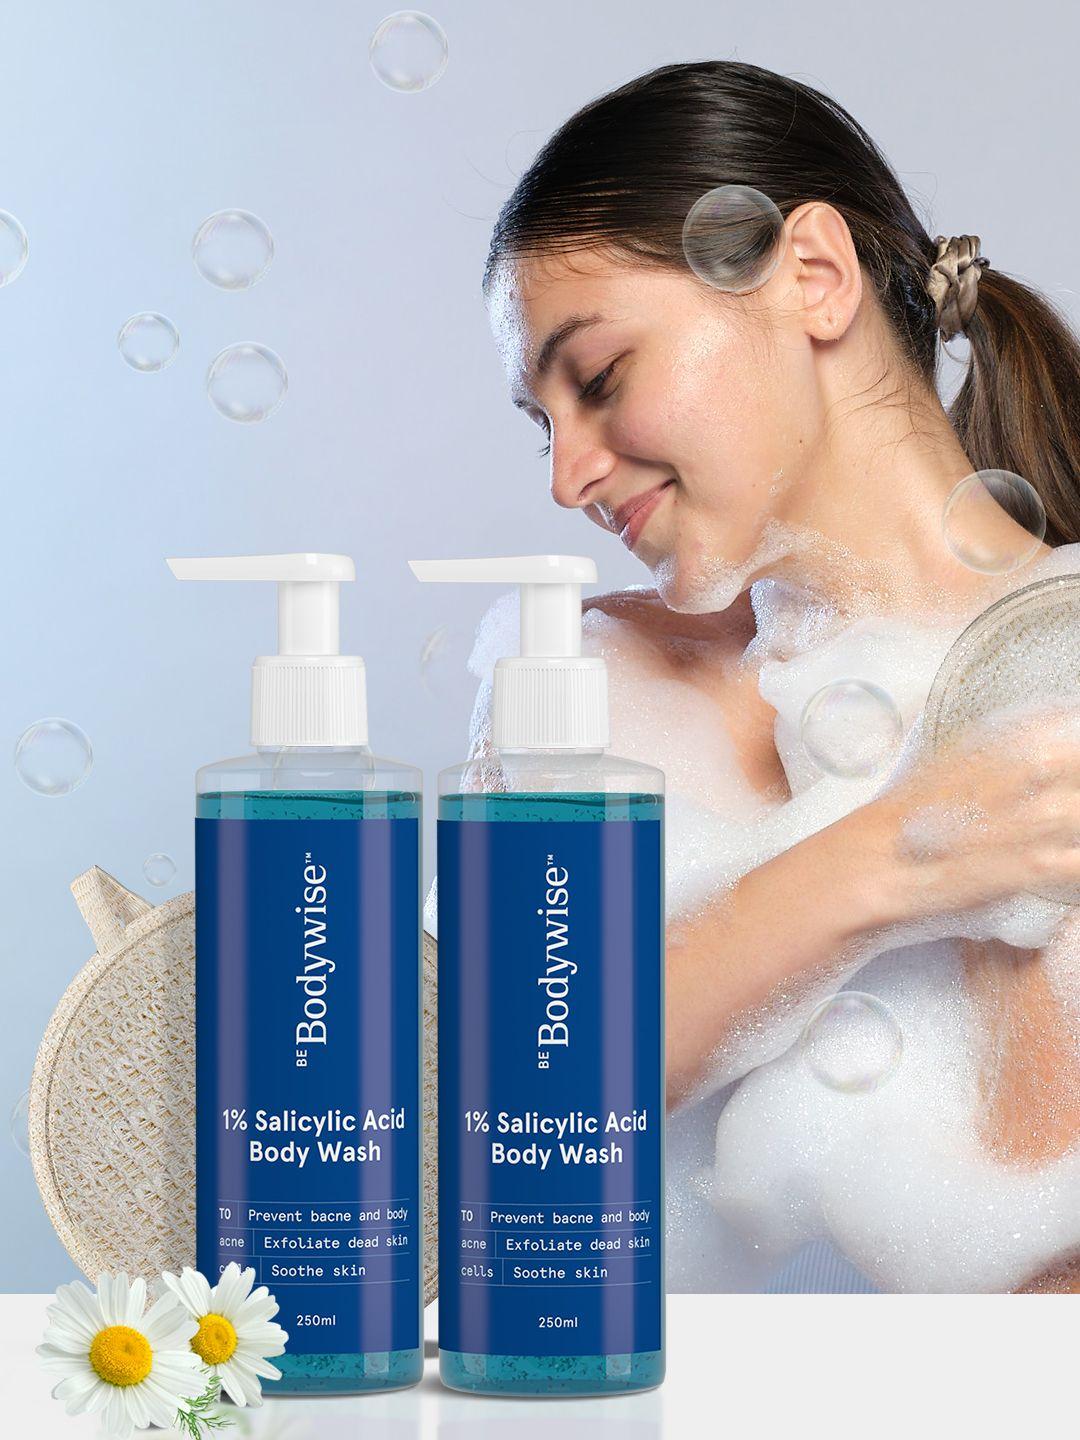 be-bodywise-set-of-2-salicylic-acid-body-wash-250ml-each-with-free-loofah-to-prevent-bacne